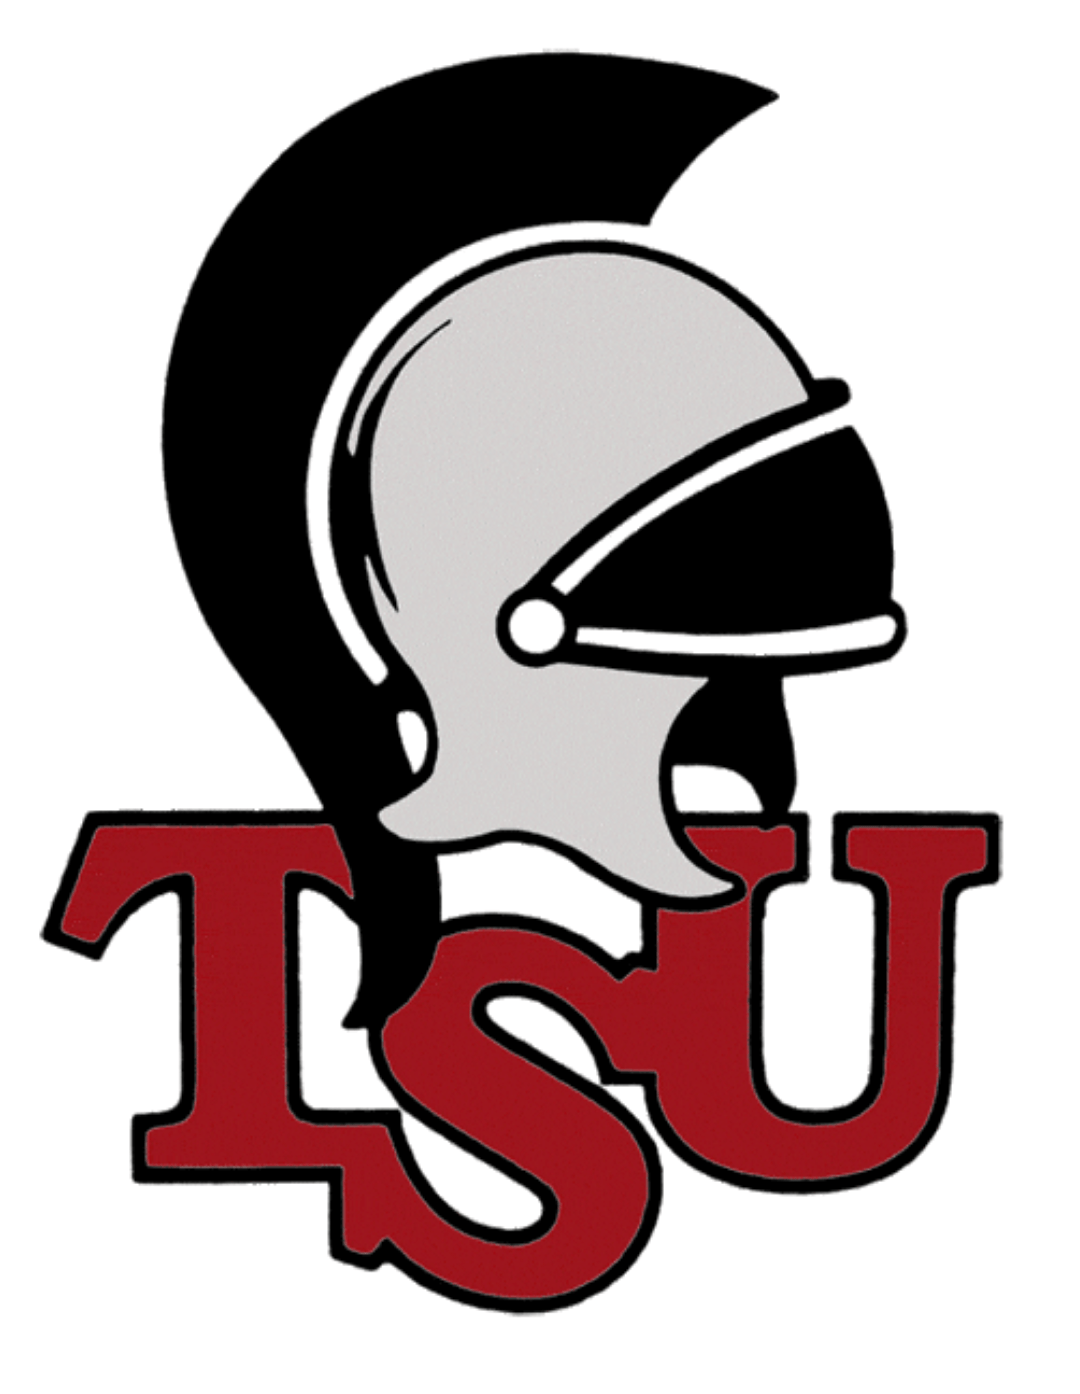 Red Troy Logo - File:Troy State drawn logo.png - Wikimedia Commons